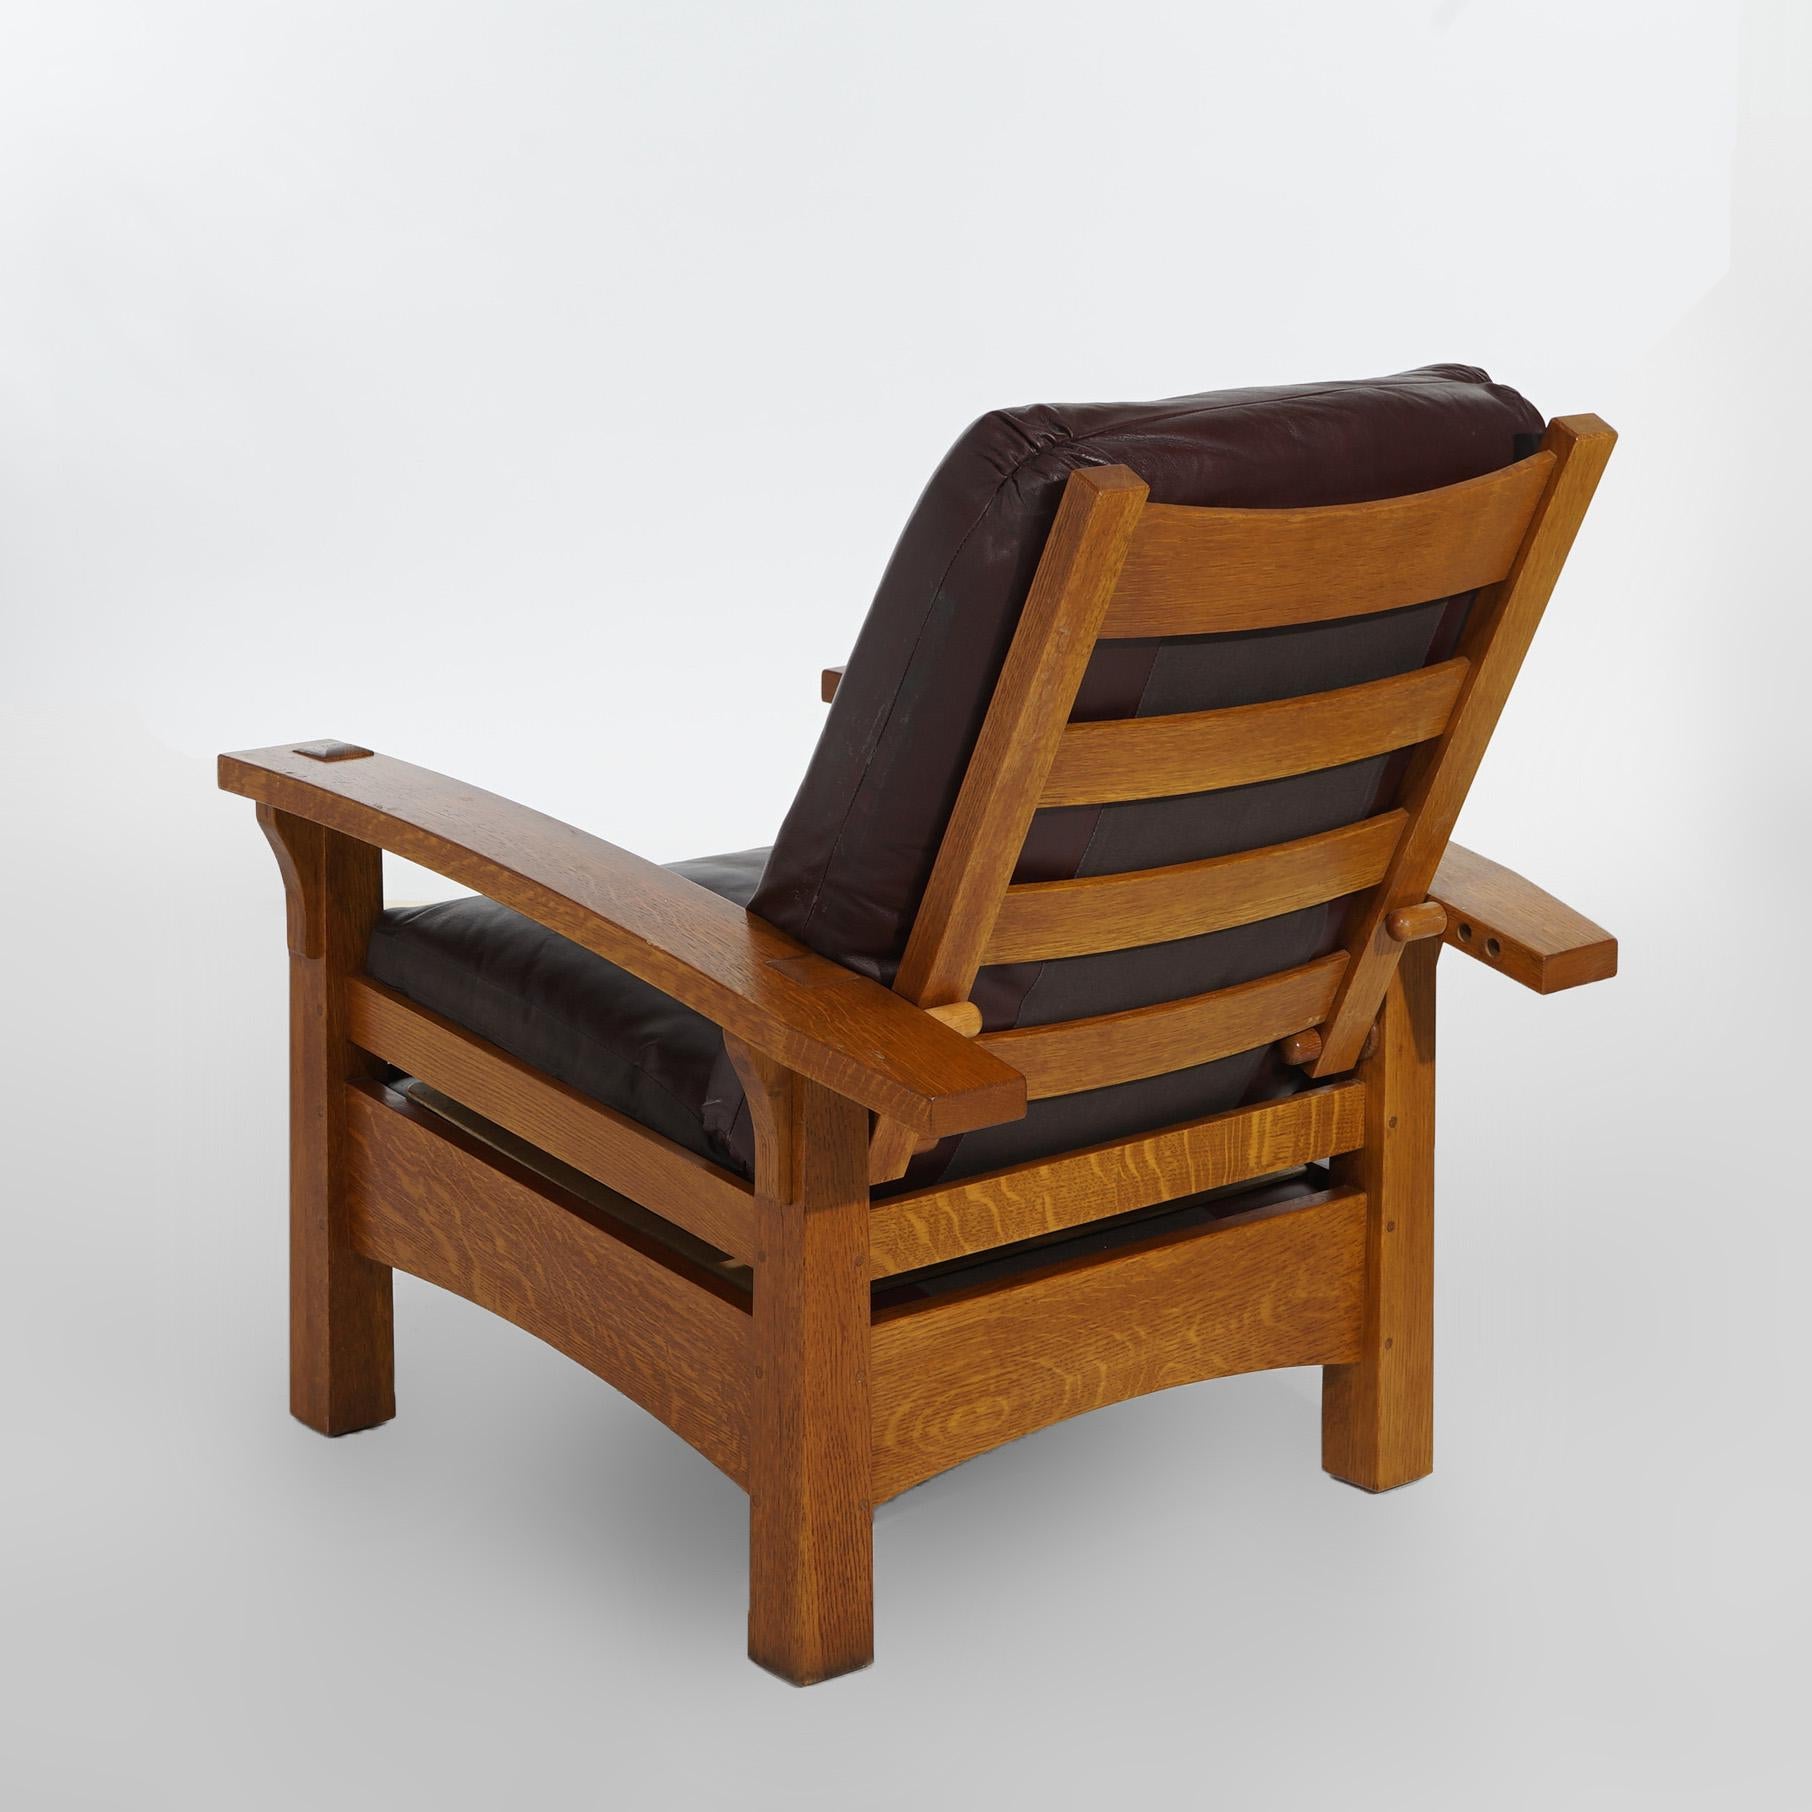 American Arts & Crafts Oak Gustav Stickley Bow Arm Morris Chair With Reverse Tapered Legs